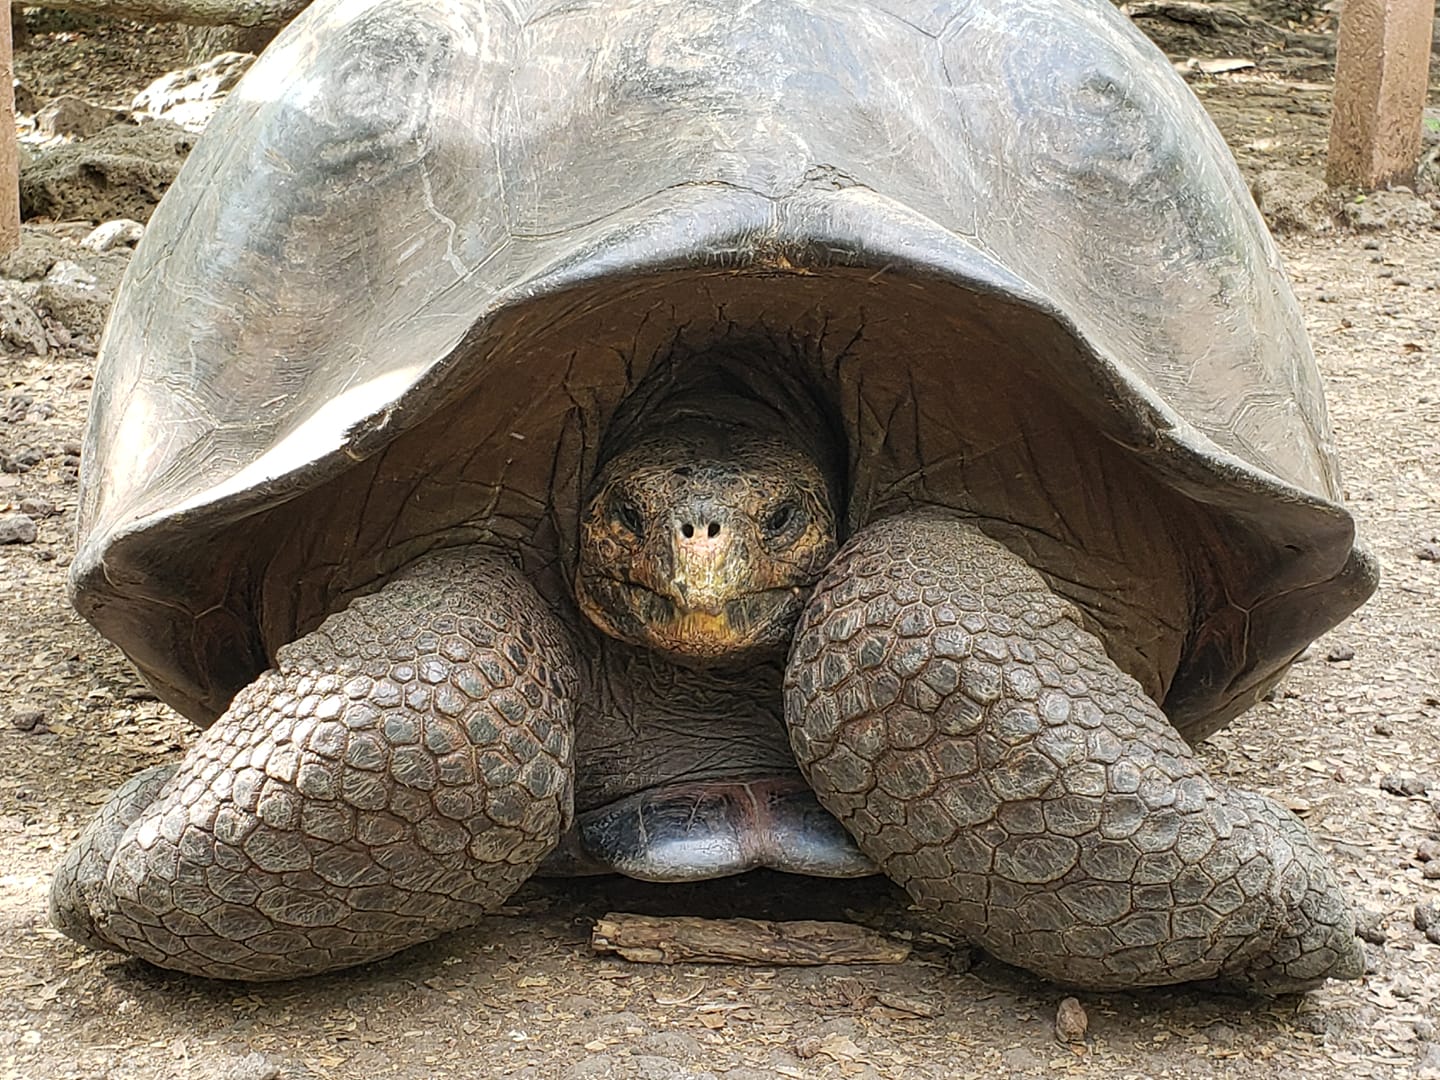 A tortoise finds shelter within the Galapagos National Park on San Cristobal Island